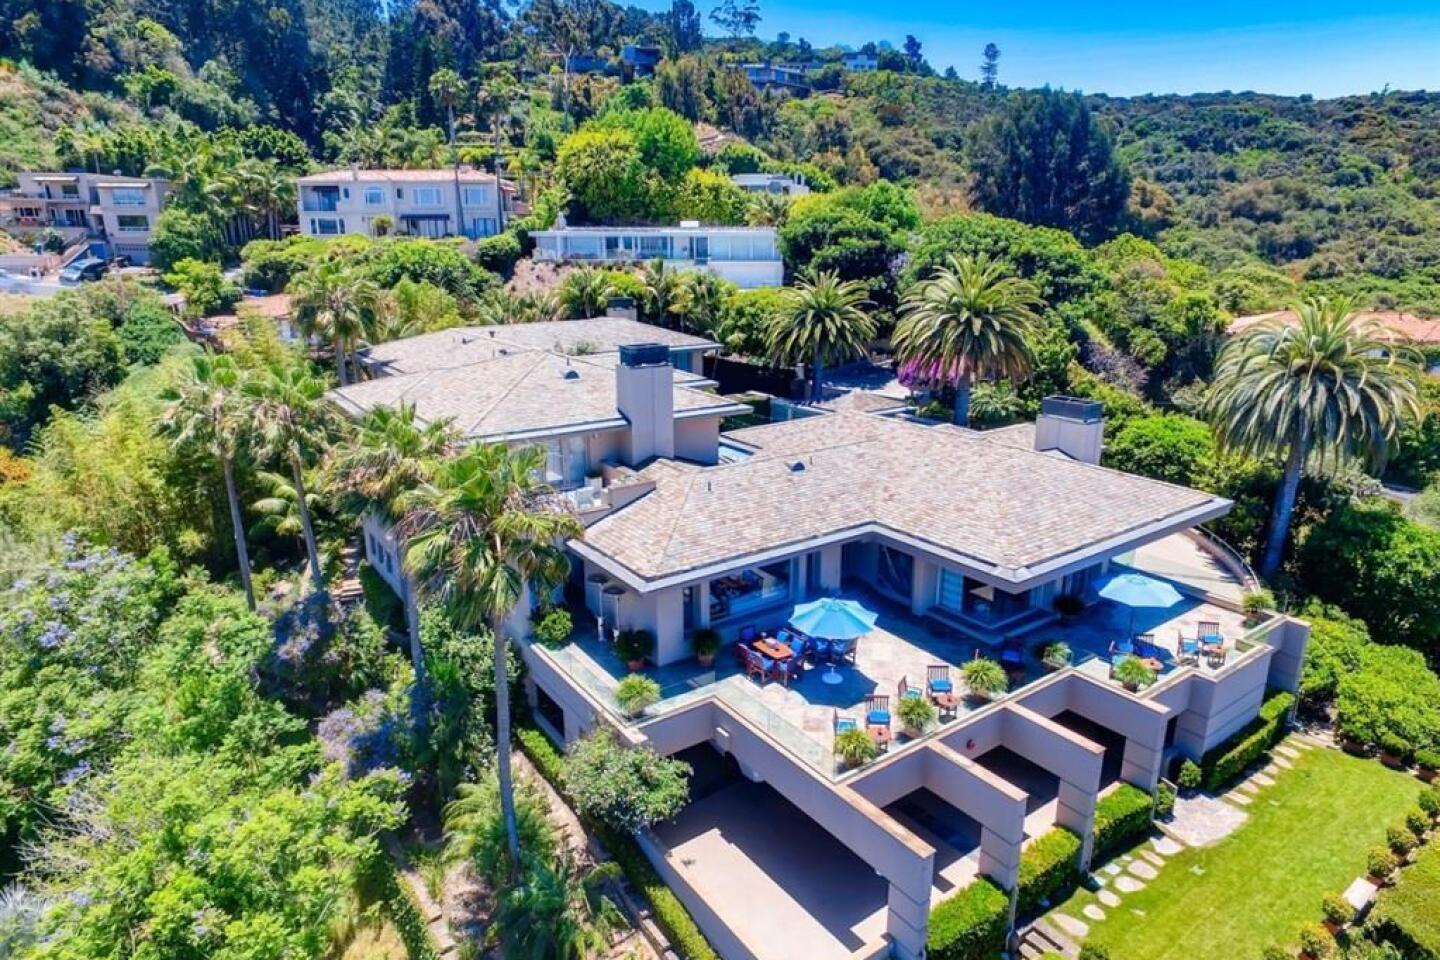 Chargers owner Dean Spanos is selling his La Jolla home, which he has lived in since 1997, for $17.95 million